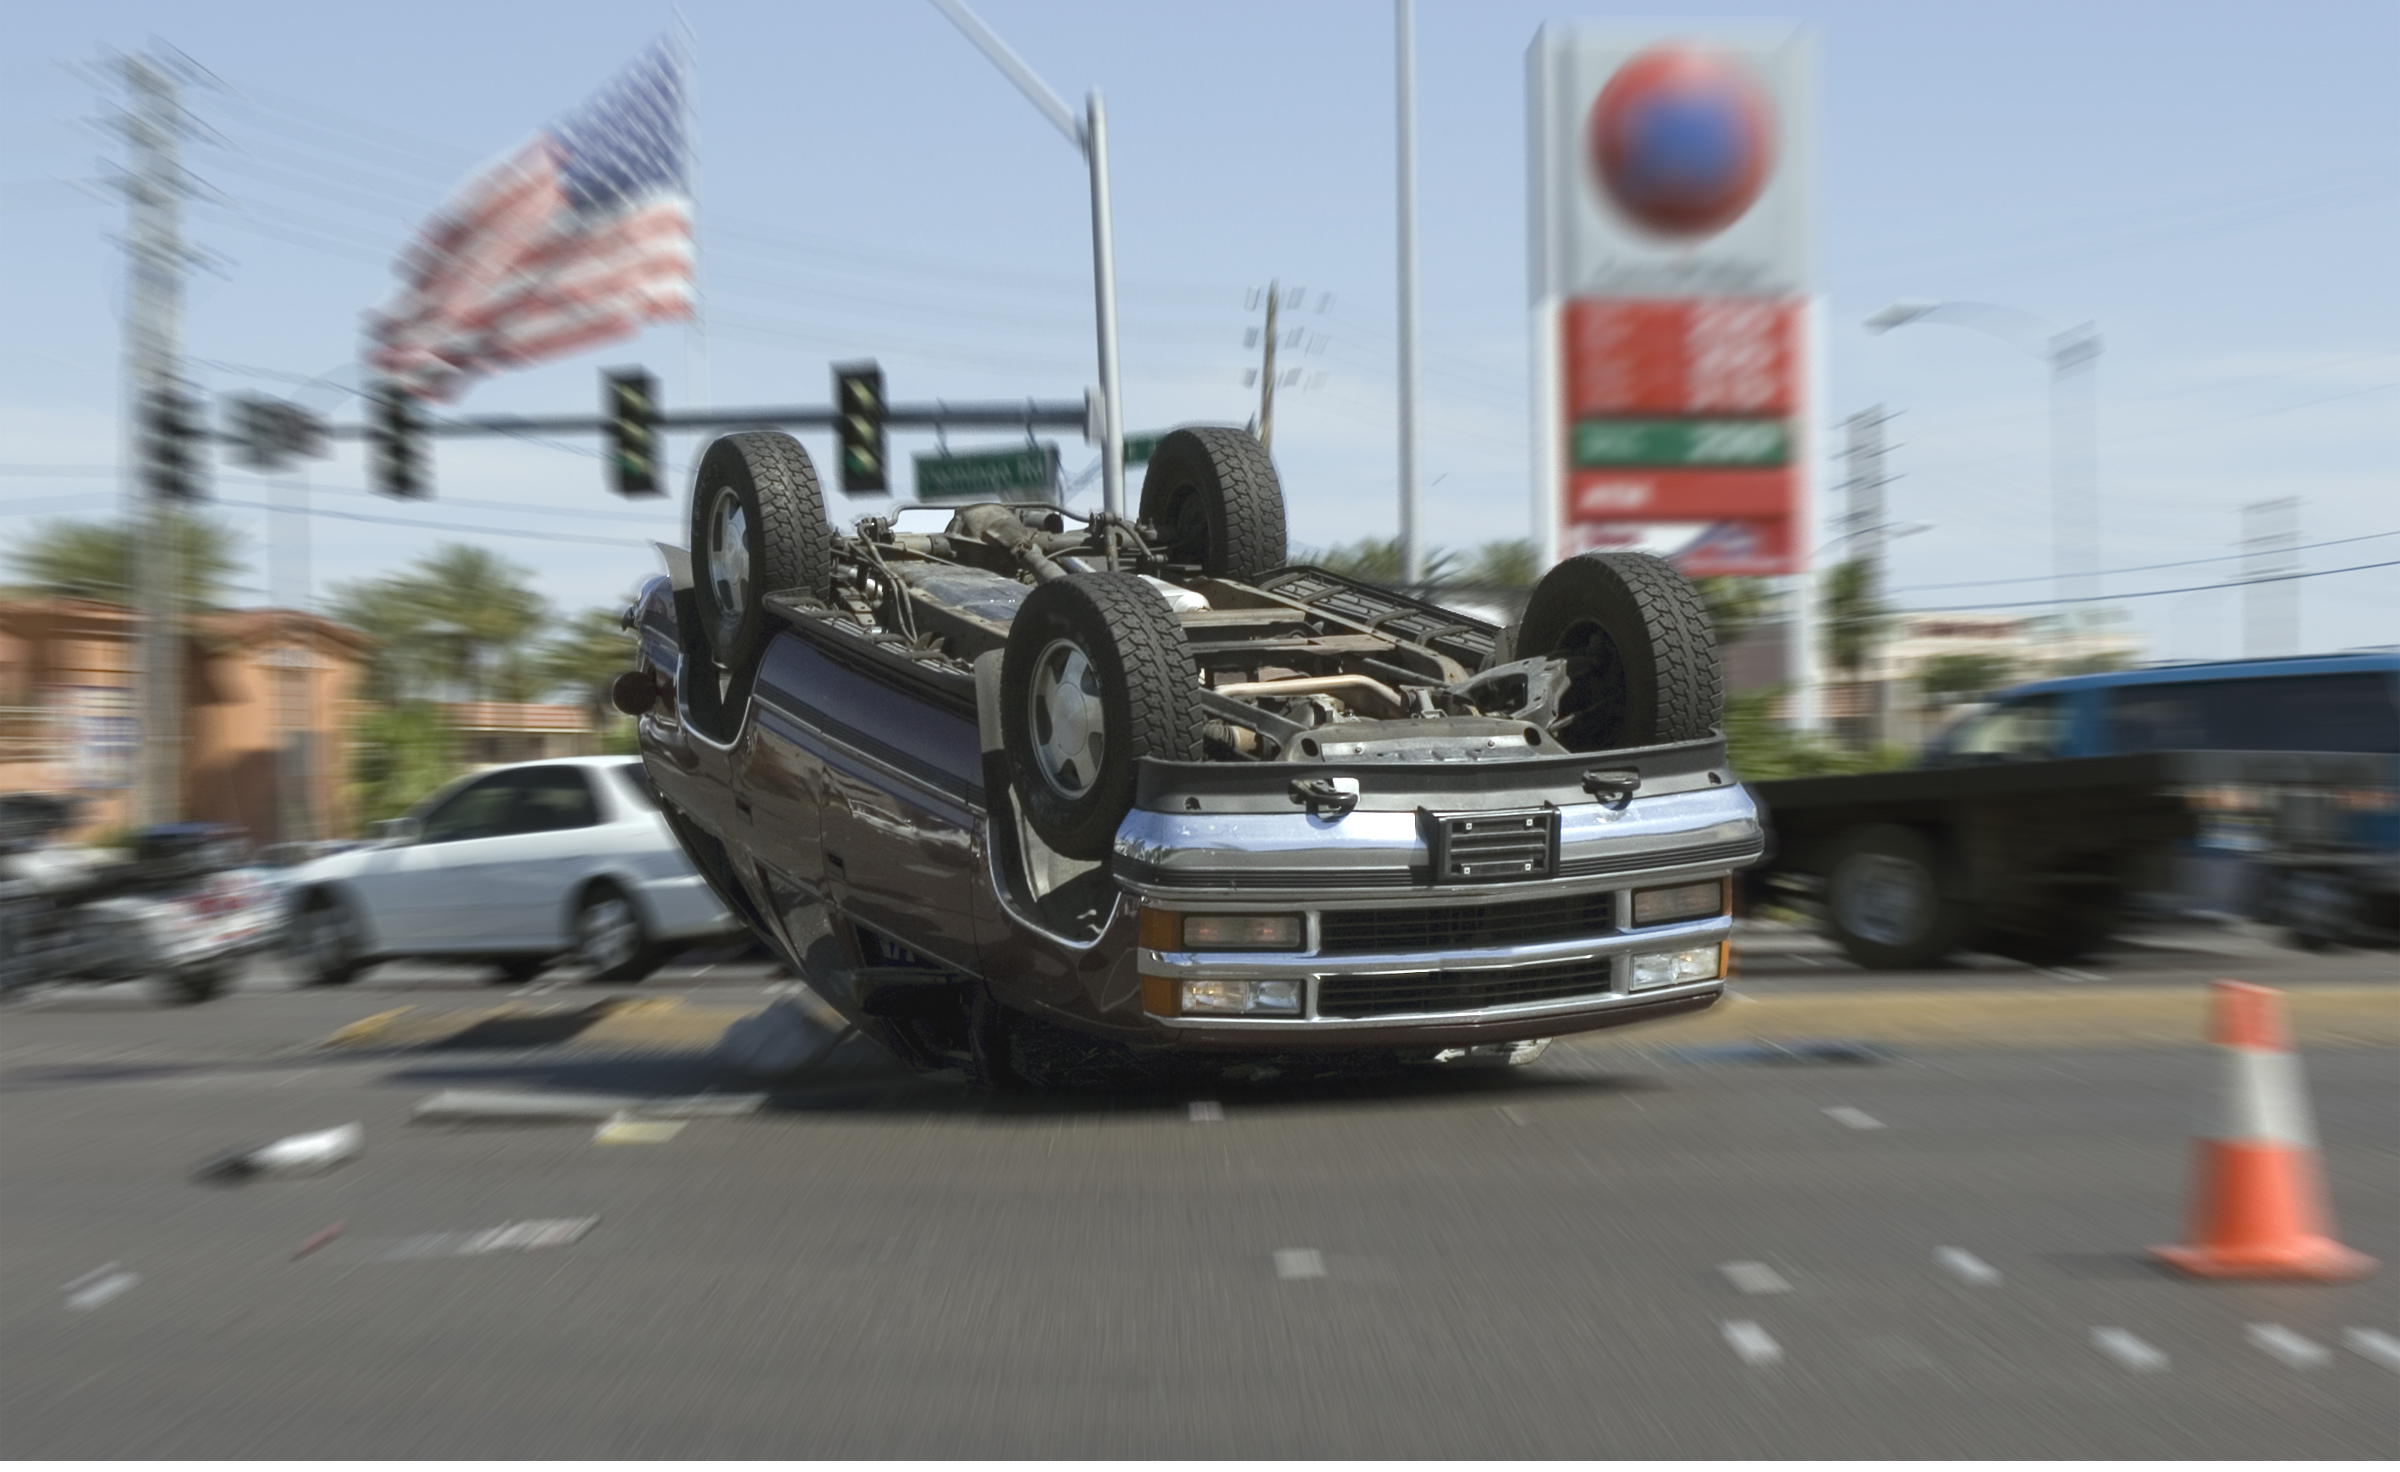 Once the accident has occurred, it’s critical to follow the correct steps on what to do post-accident, whether it be examining yourself for injuries, correctly collecting insurance information, or realizing that you may need a skilled accident attorney specializing in automobile crashes.